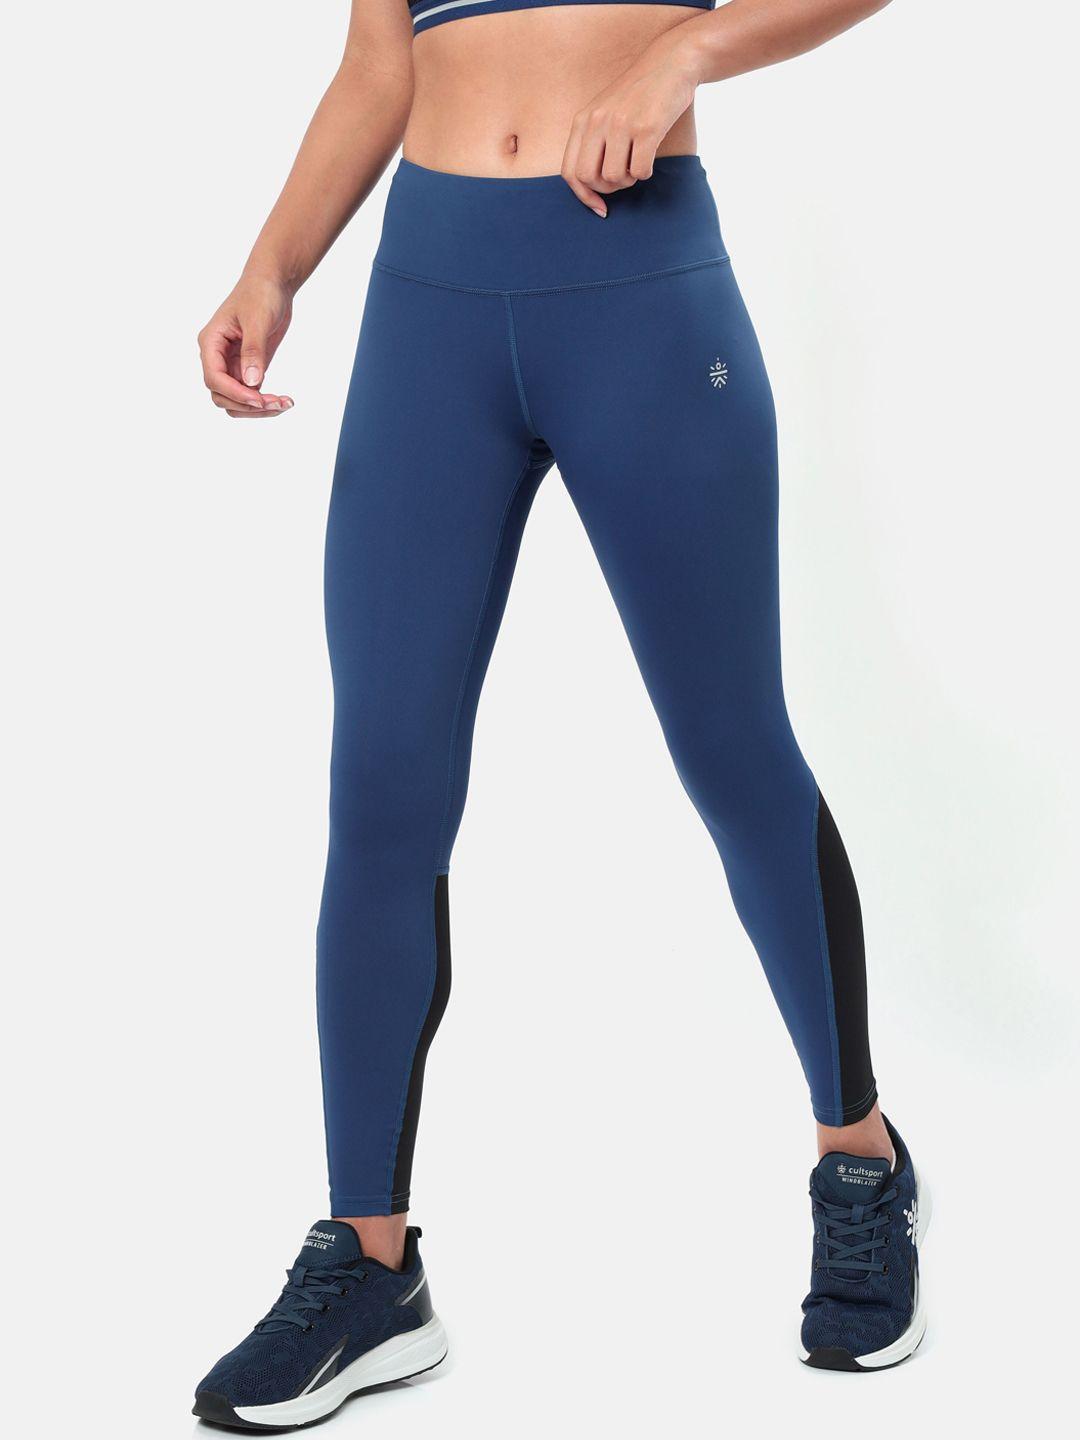 cultsport women navy blue absolute fit sports tights